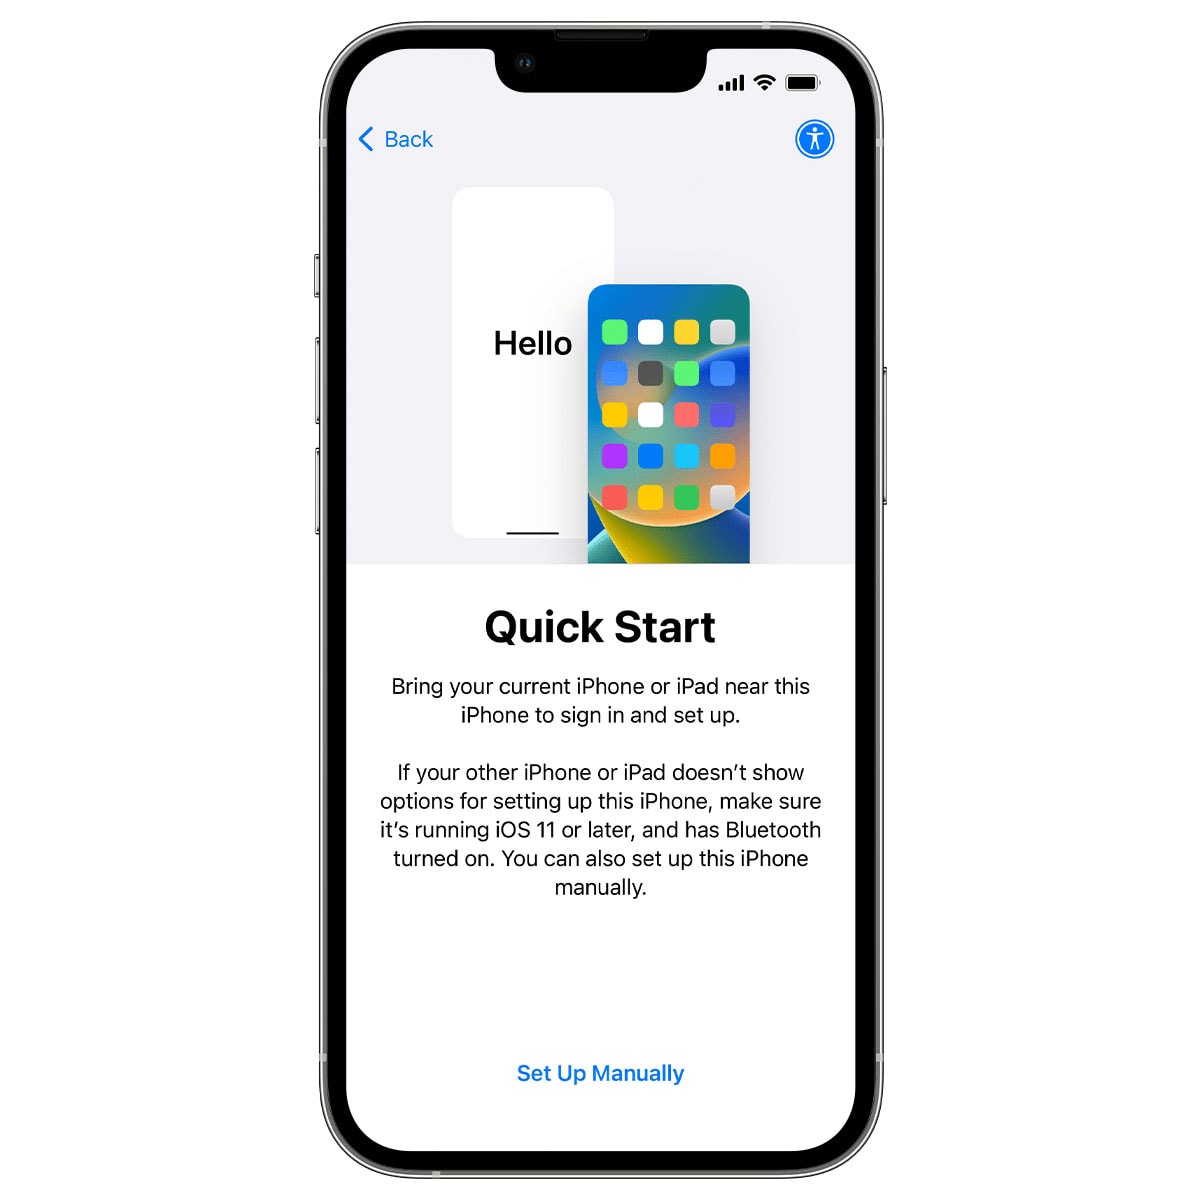 iPhone showing "Quick Start: Bring your current iPhone or iPad near this iPhone to sign in and get set up." with a button that says "Set Up Manually"